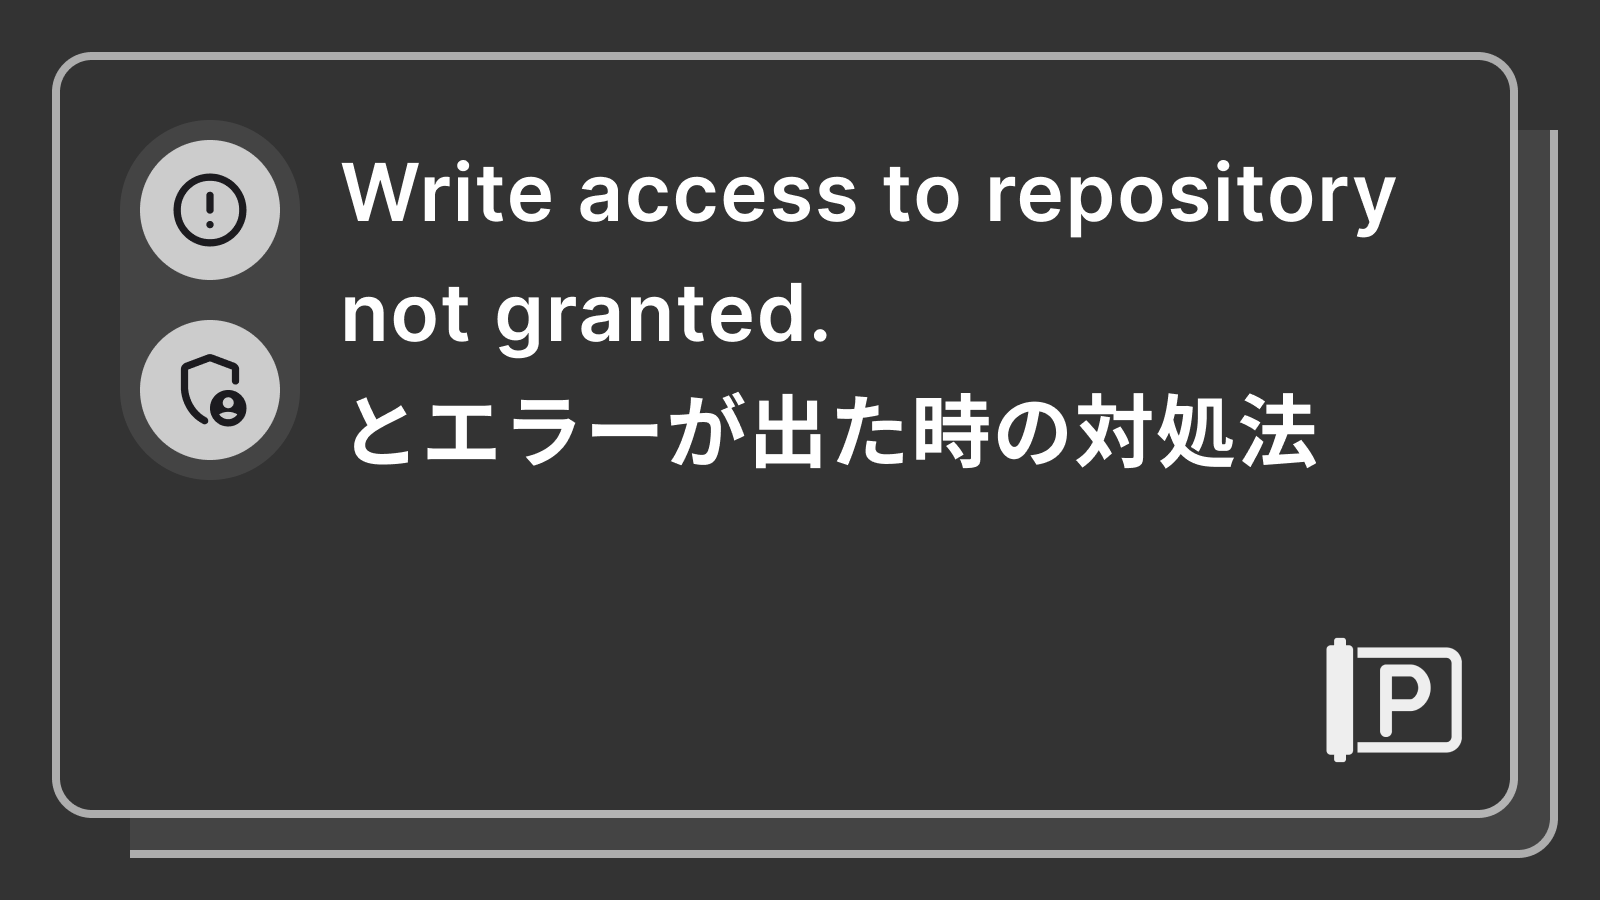 Write access to repository not granted.とエラーが出た時の対処法